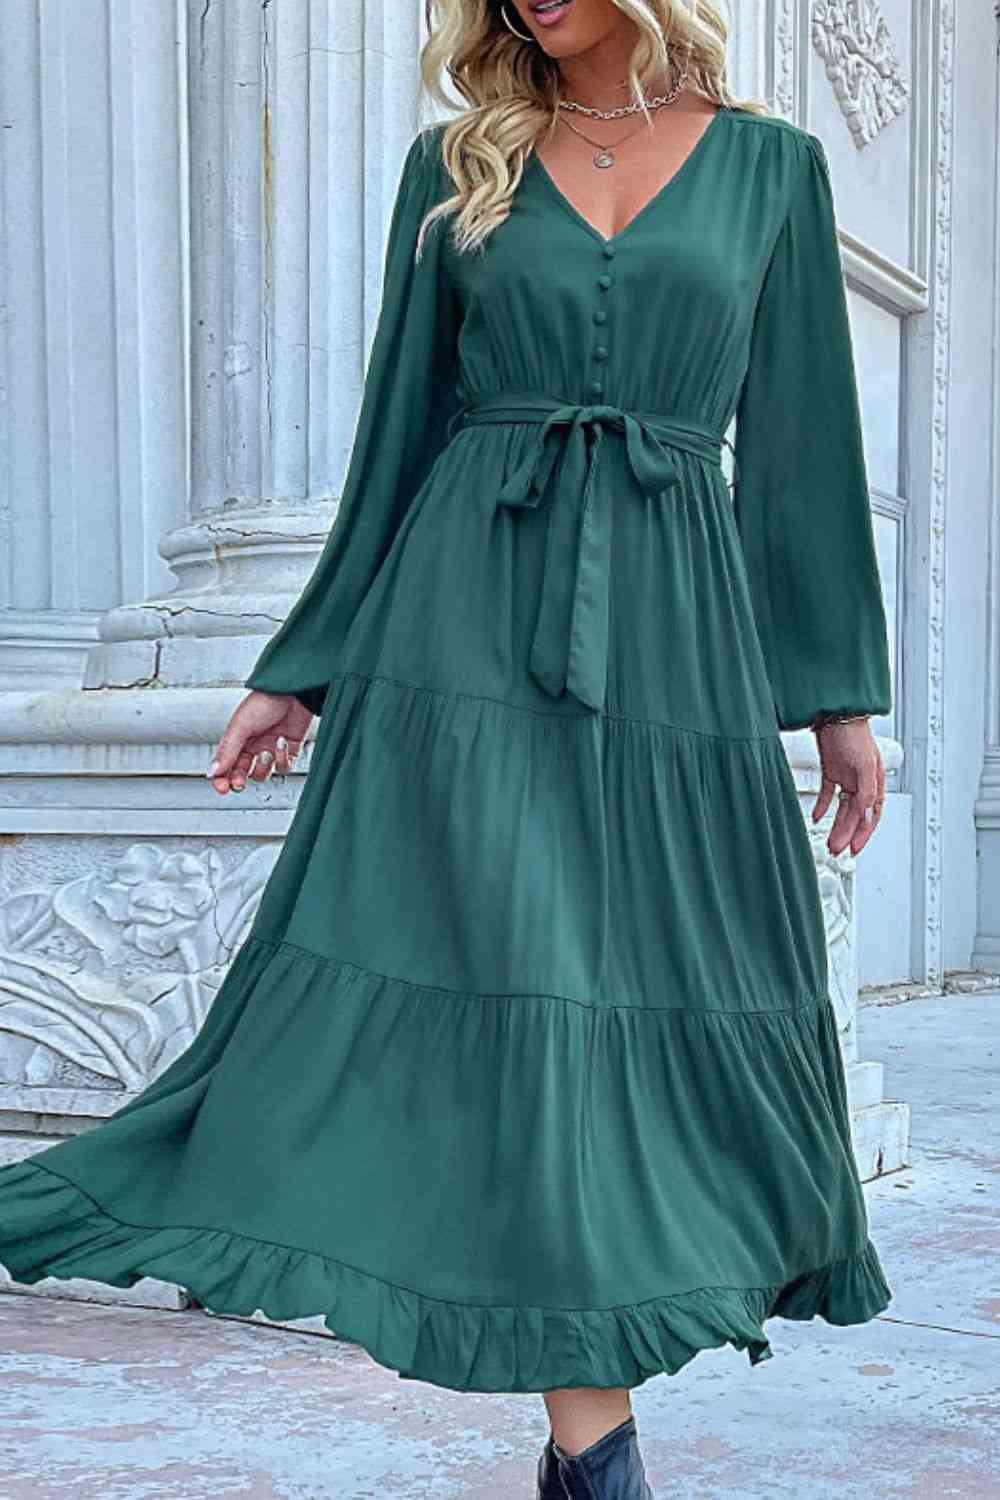 a woman wearing a green dress and cowboy boots